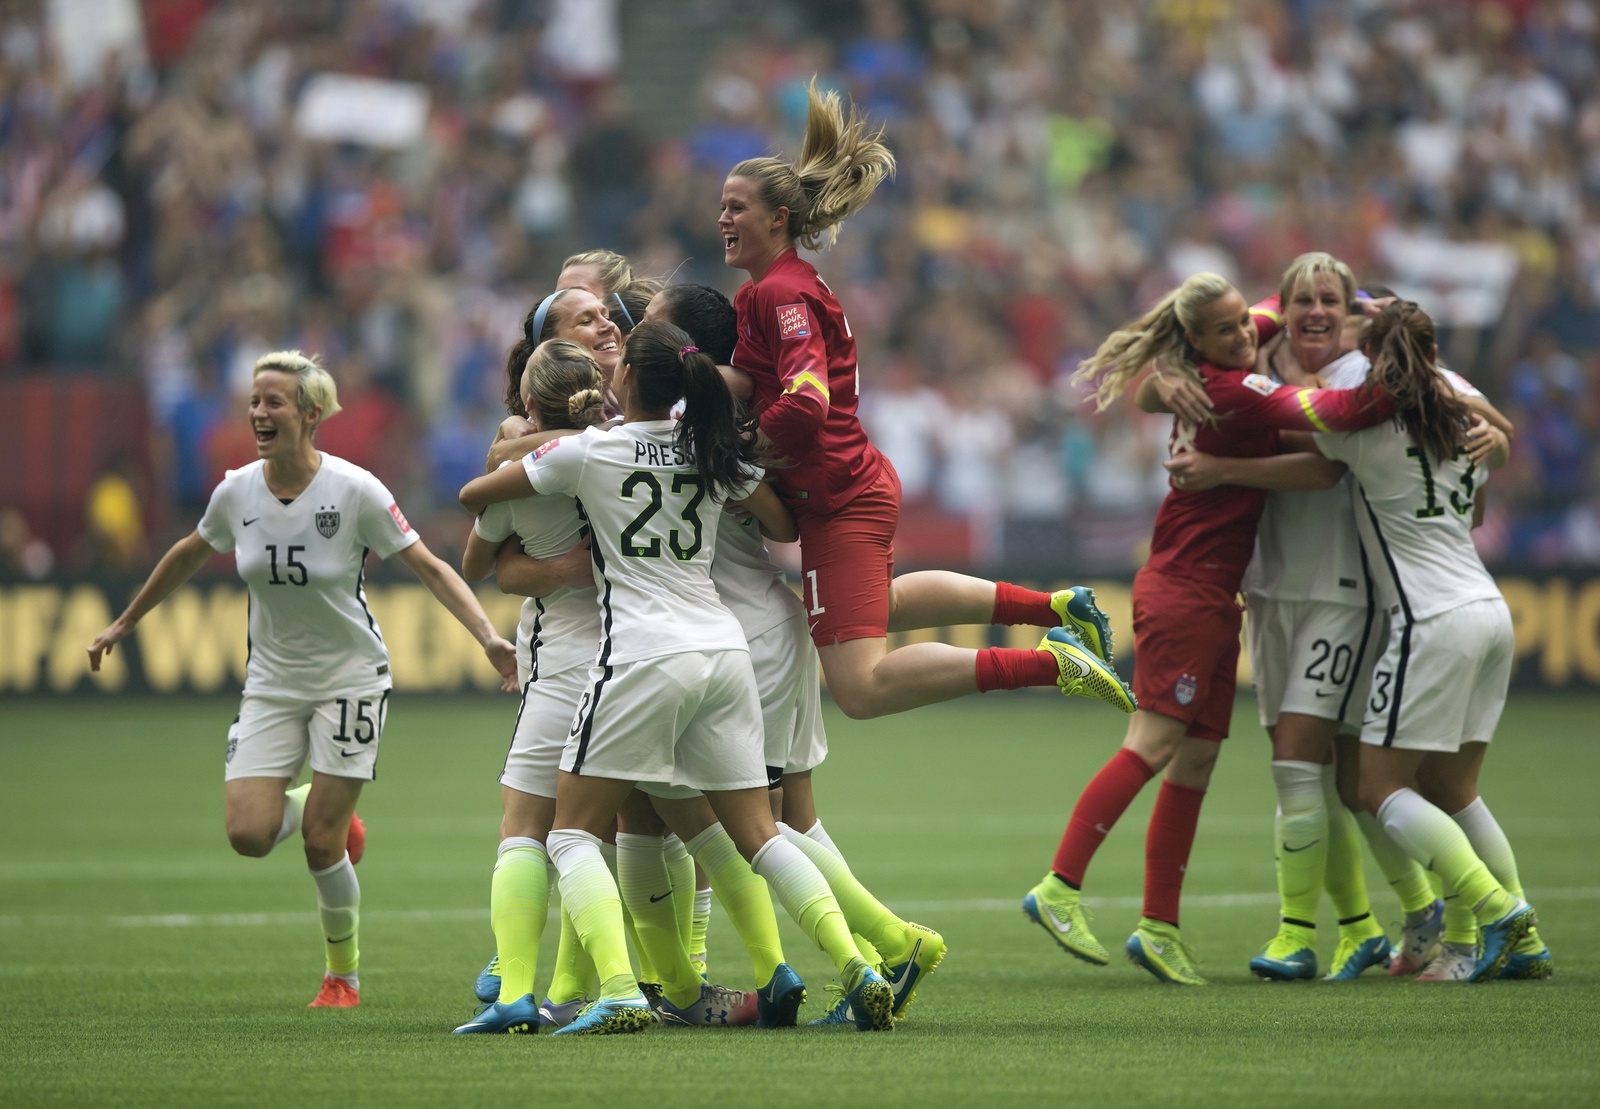 United States players celebrate after they defeated Japan 5-2 in the FIFA Women's World Cup soccer championship in Vancouver, British Columbia, Canada, Sunday, July 5, 2015. (Darryl Dyck/The Canadian Press via AP) MANDATORY CREDIT